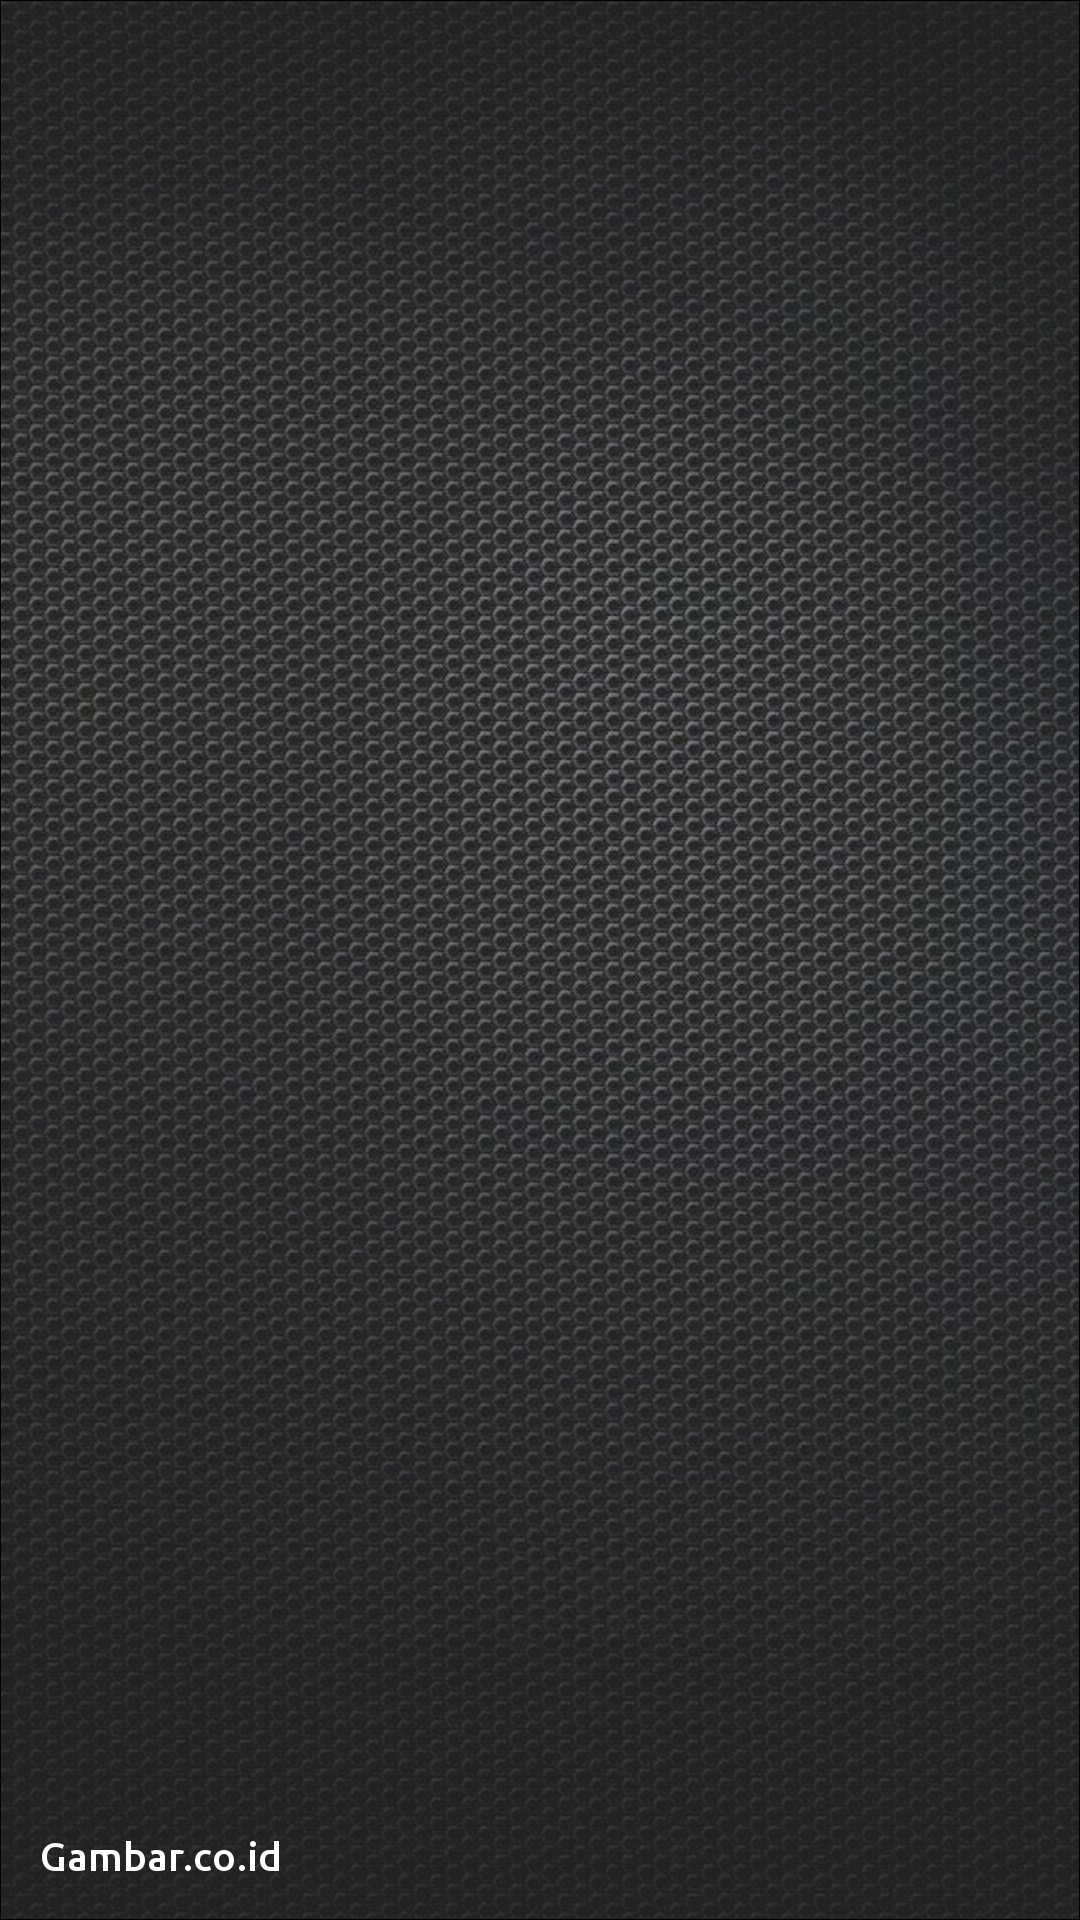 1080x1920 leather iphone wallpaper #747678 .